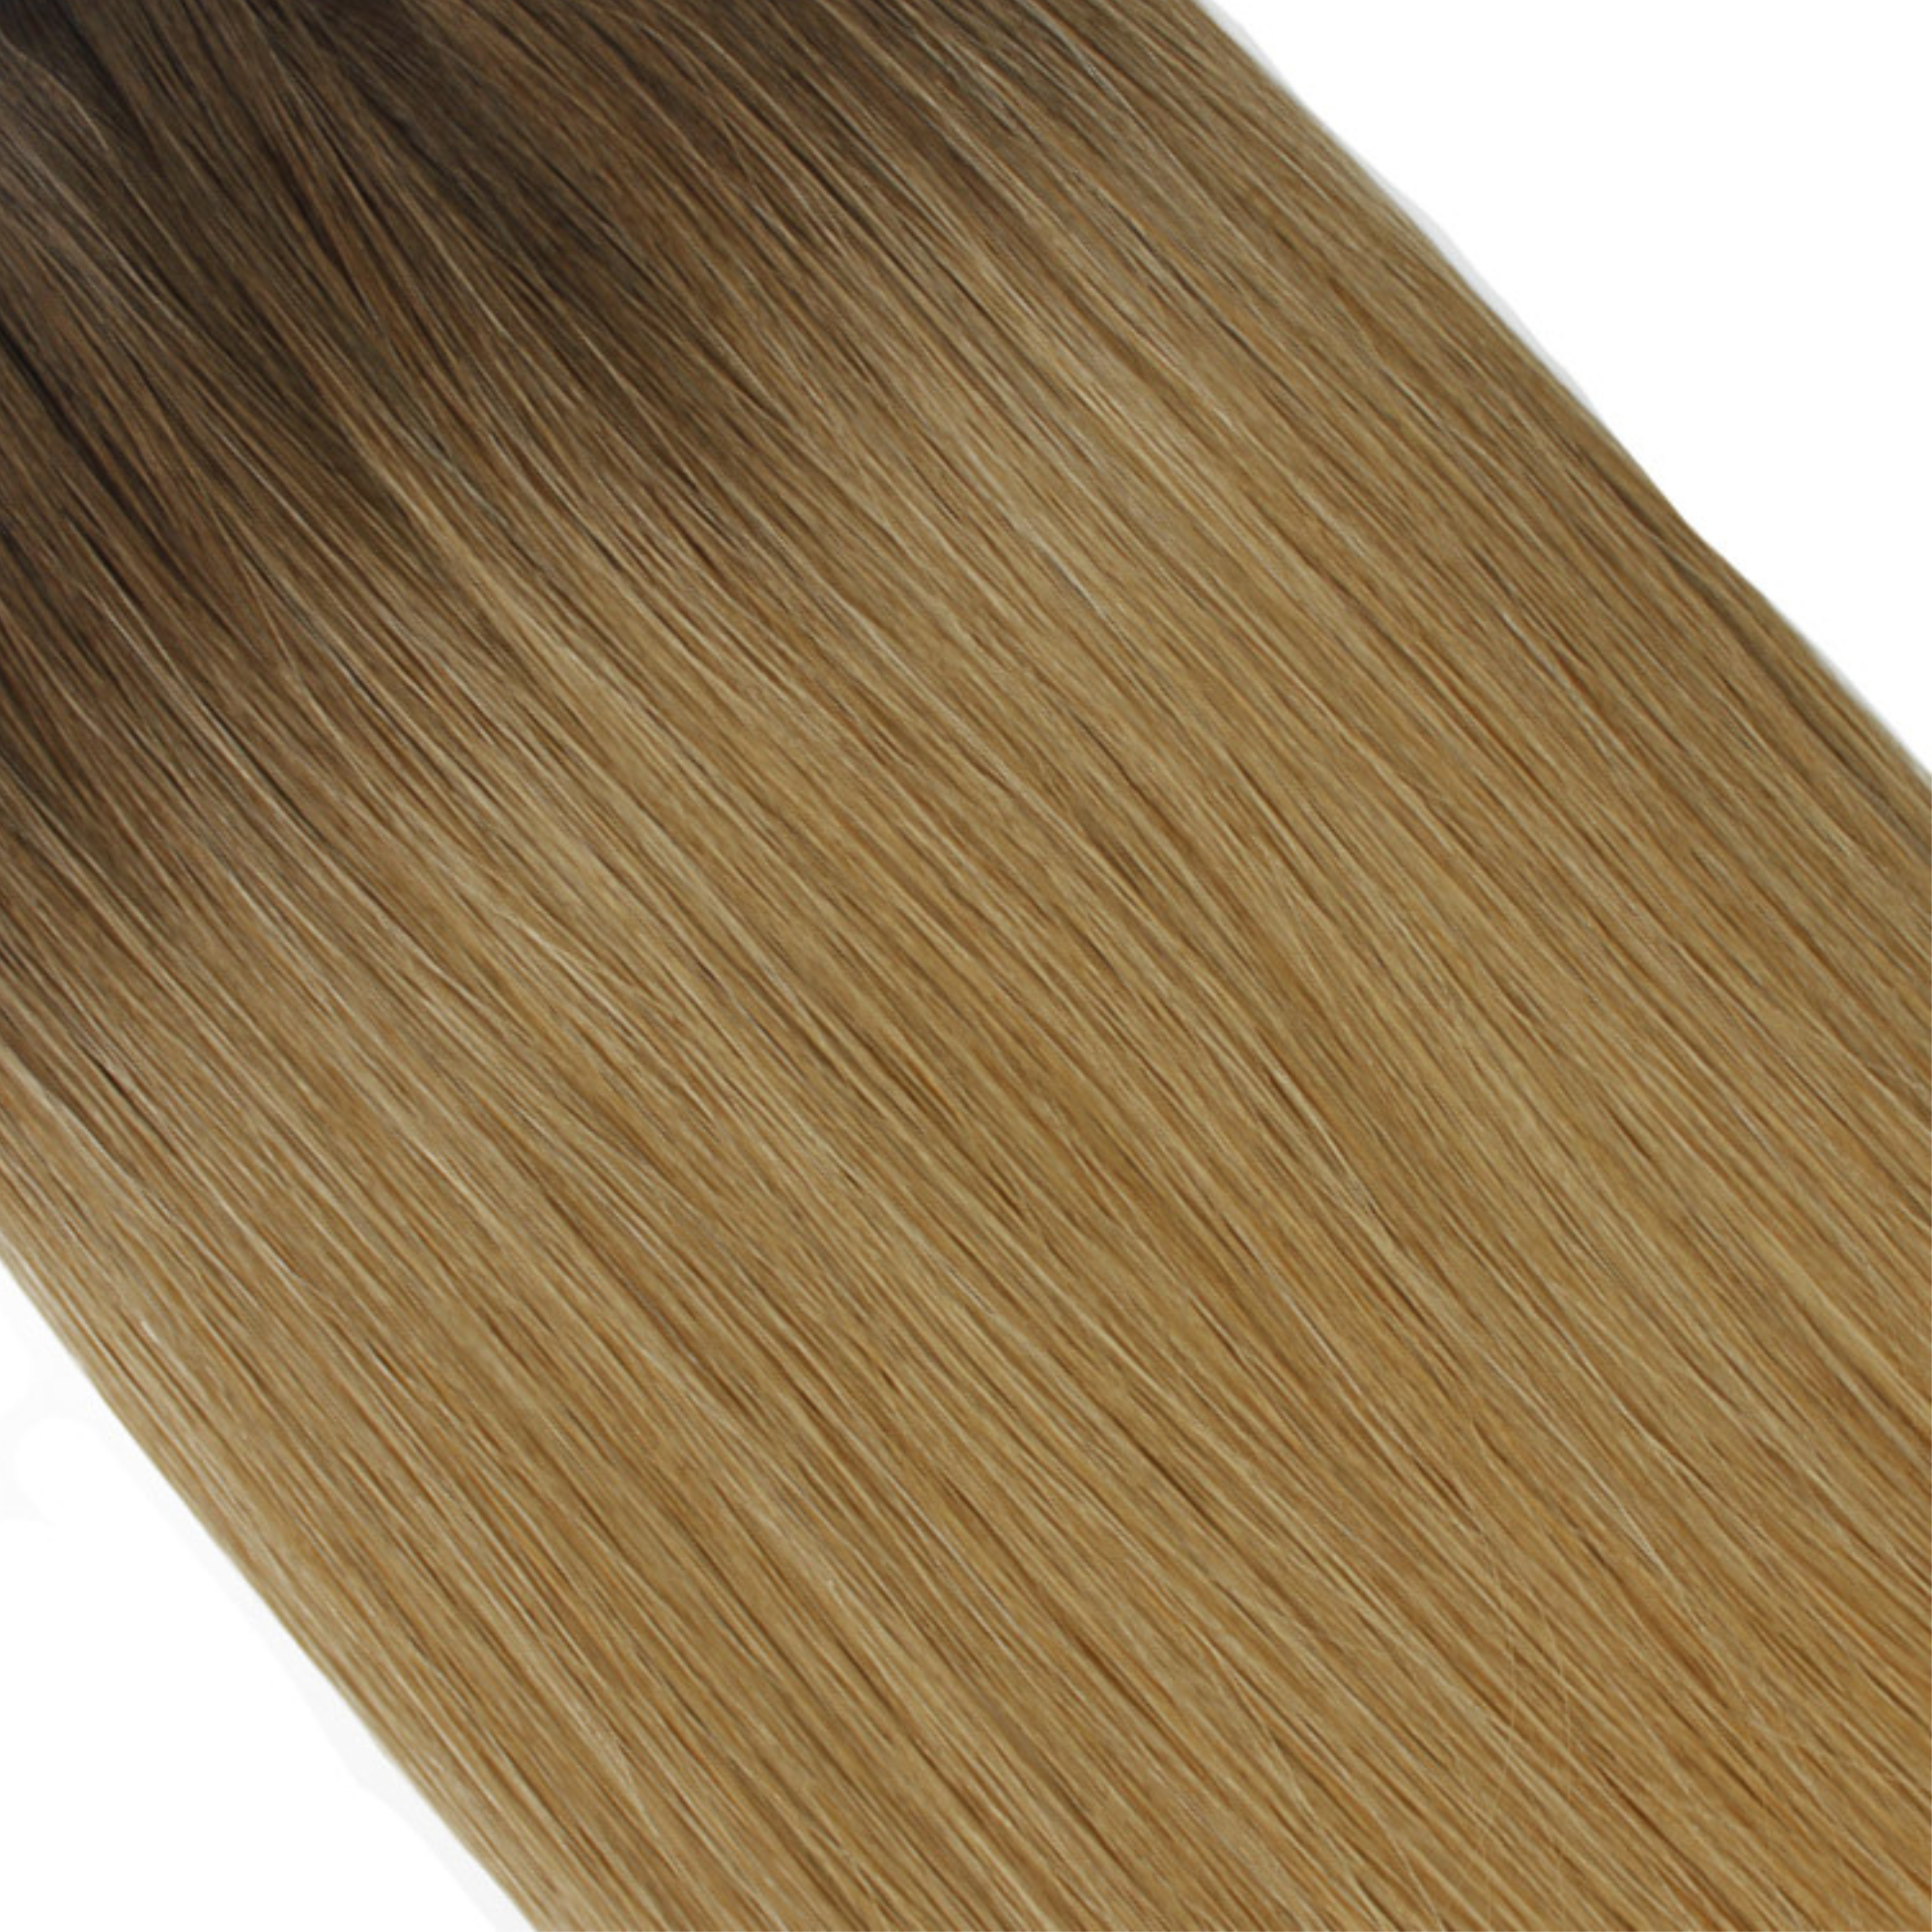 "hair rehab london 18" tape hair extensions shade swatch titled rooted boho"